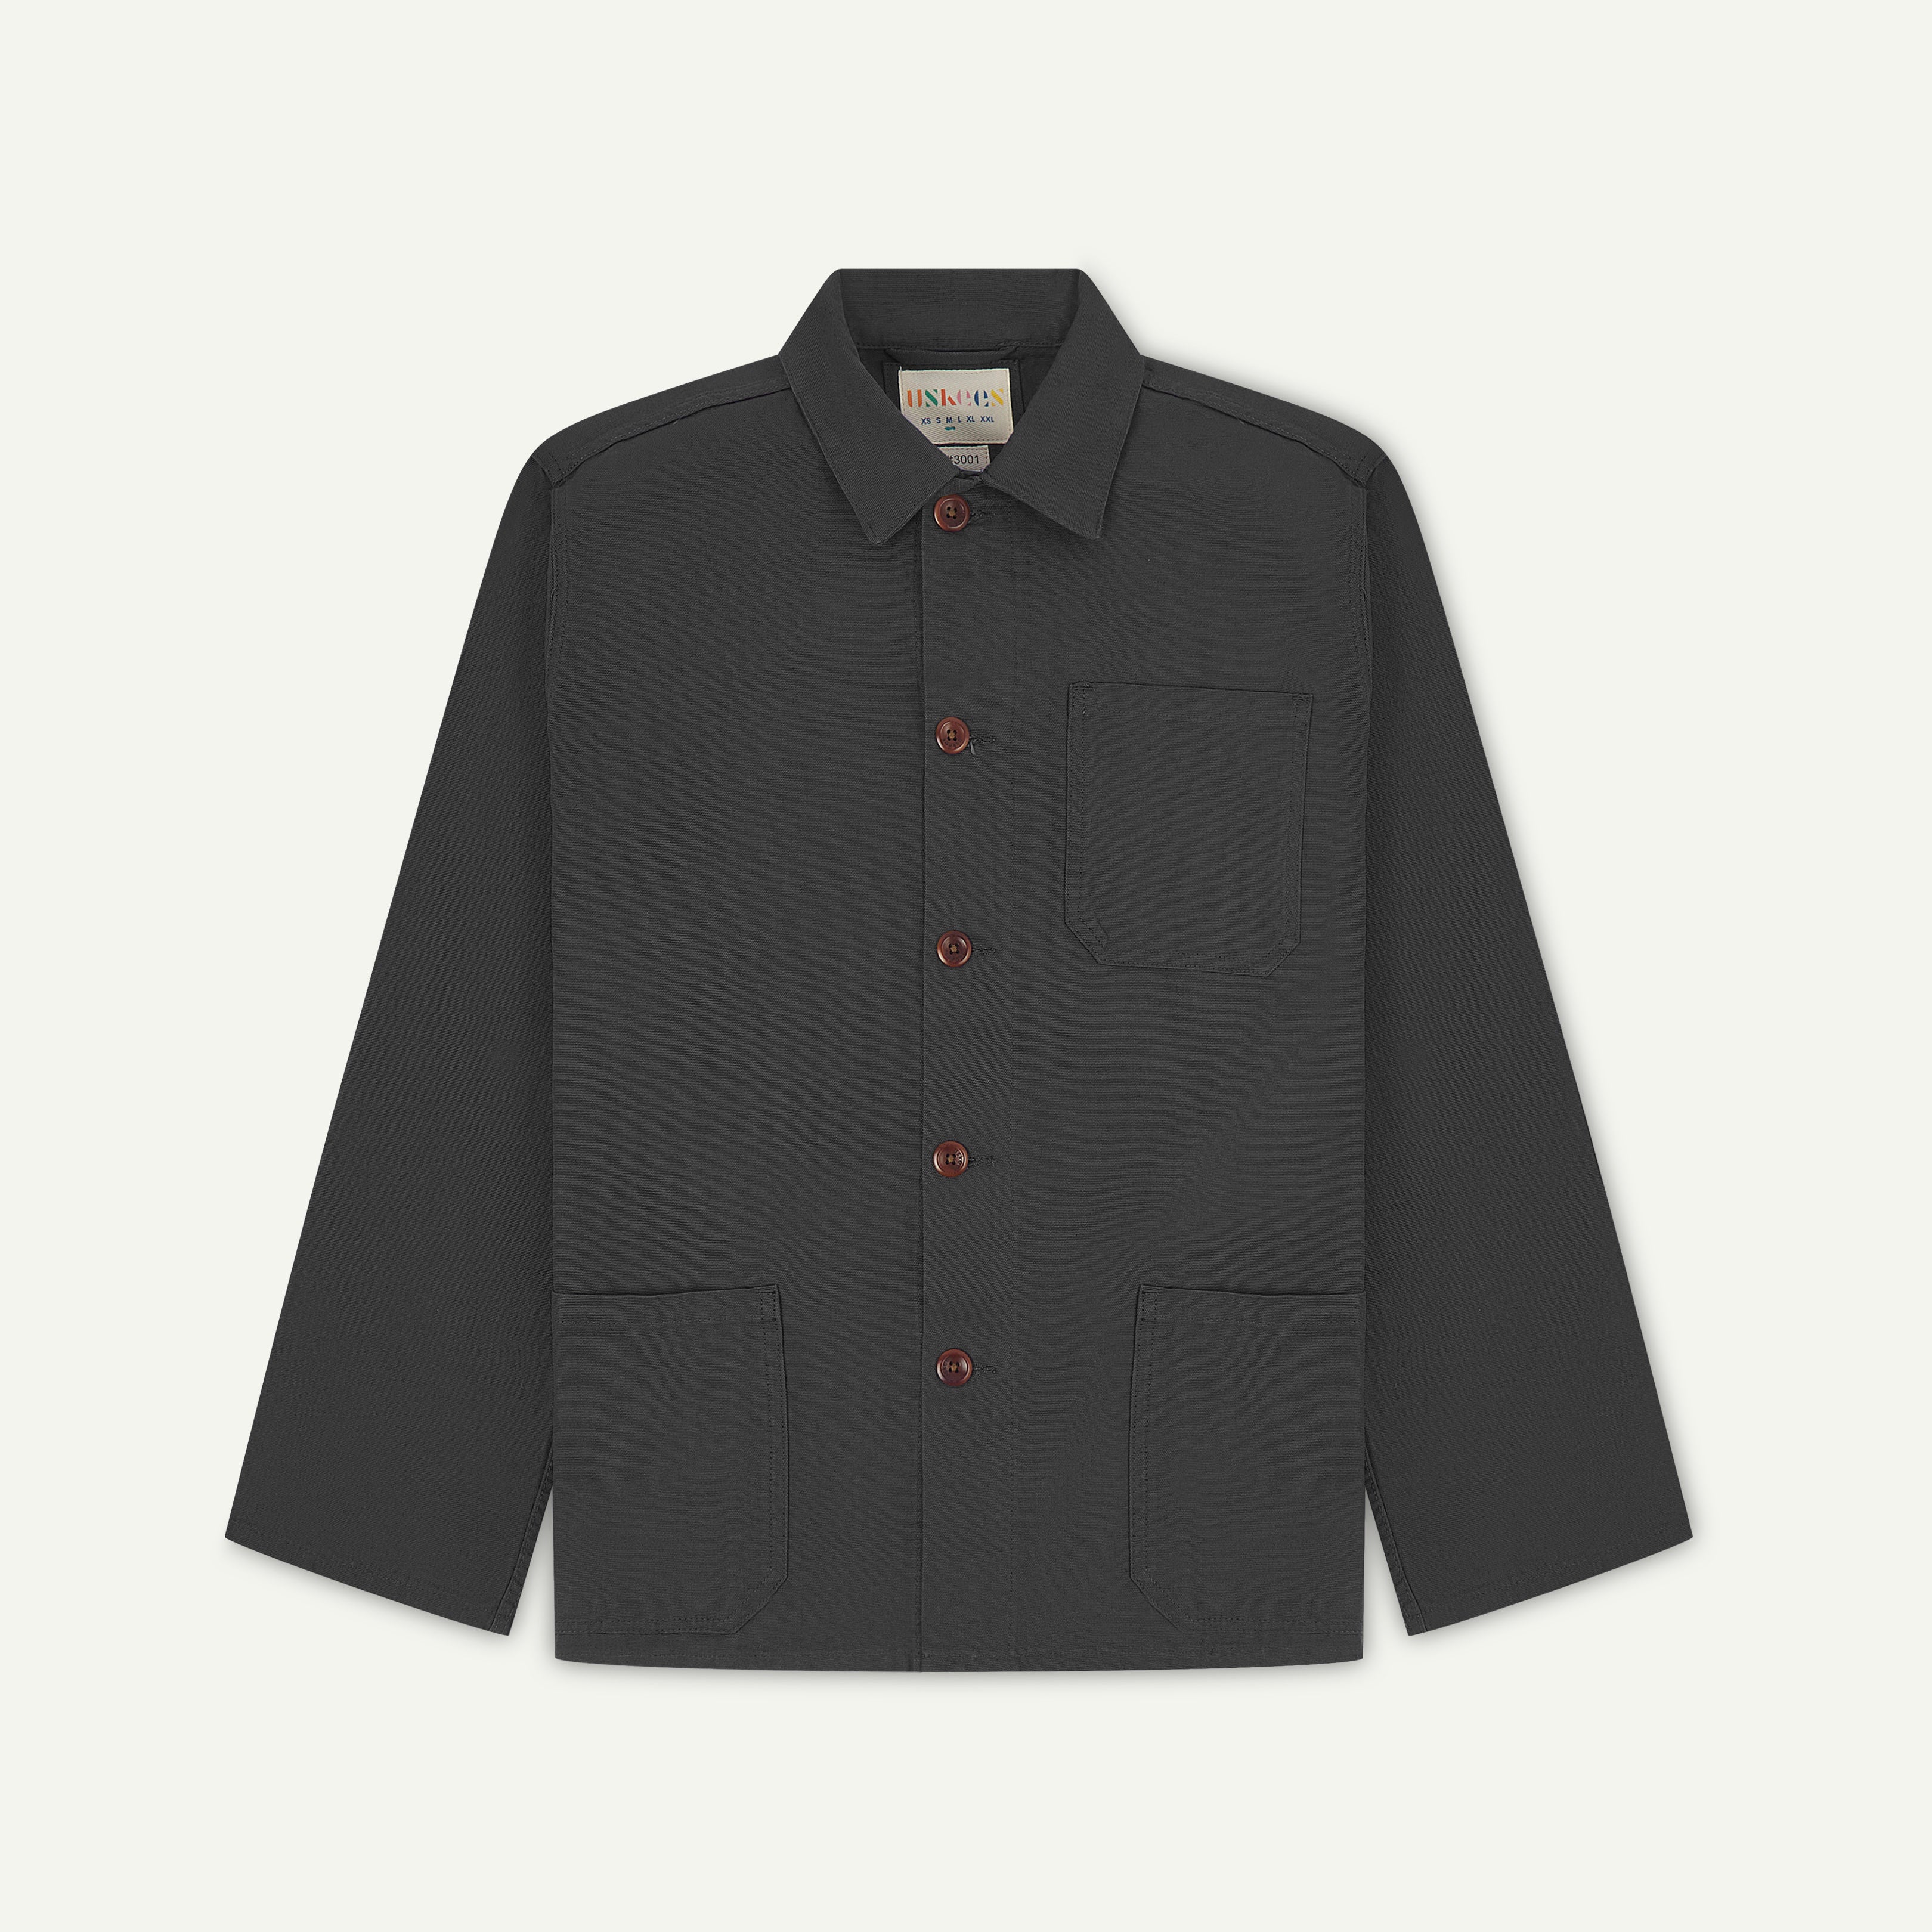 black men's overshirt with buttons done up and showing uskees neck label